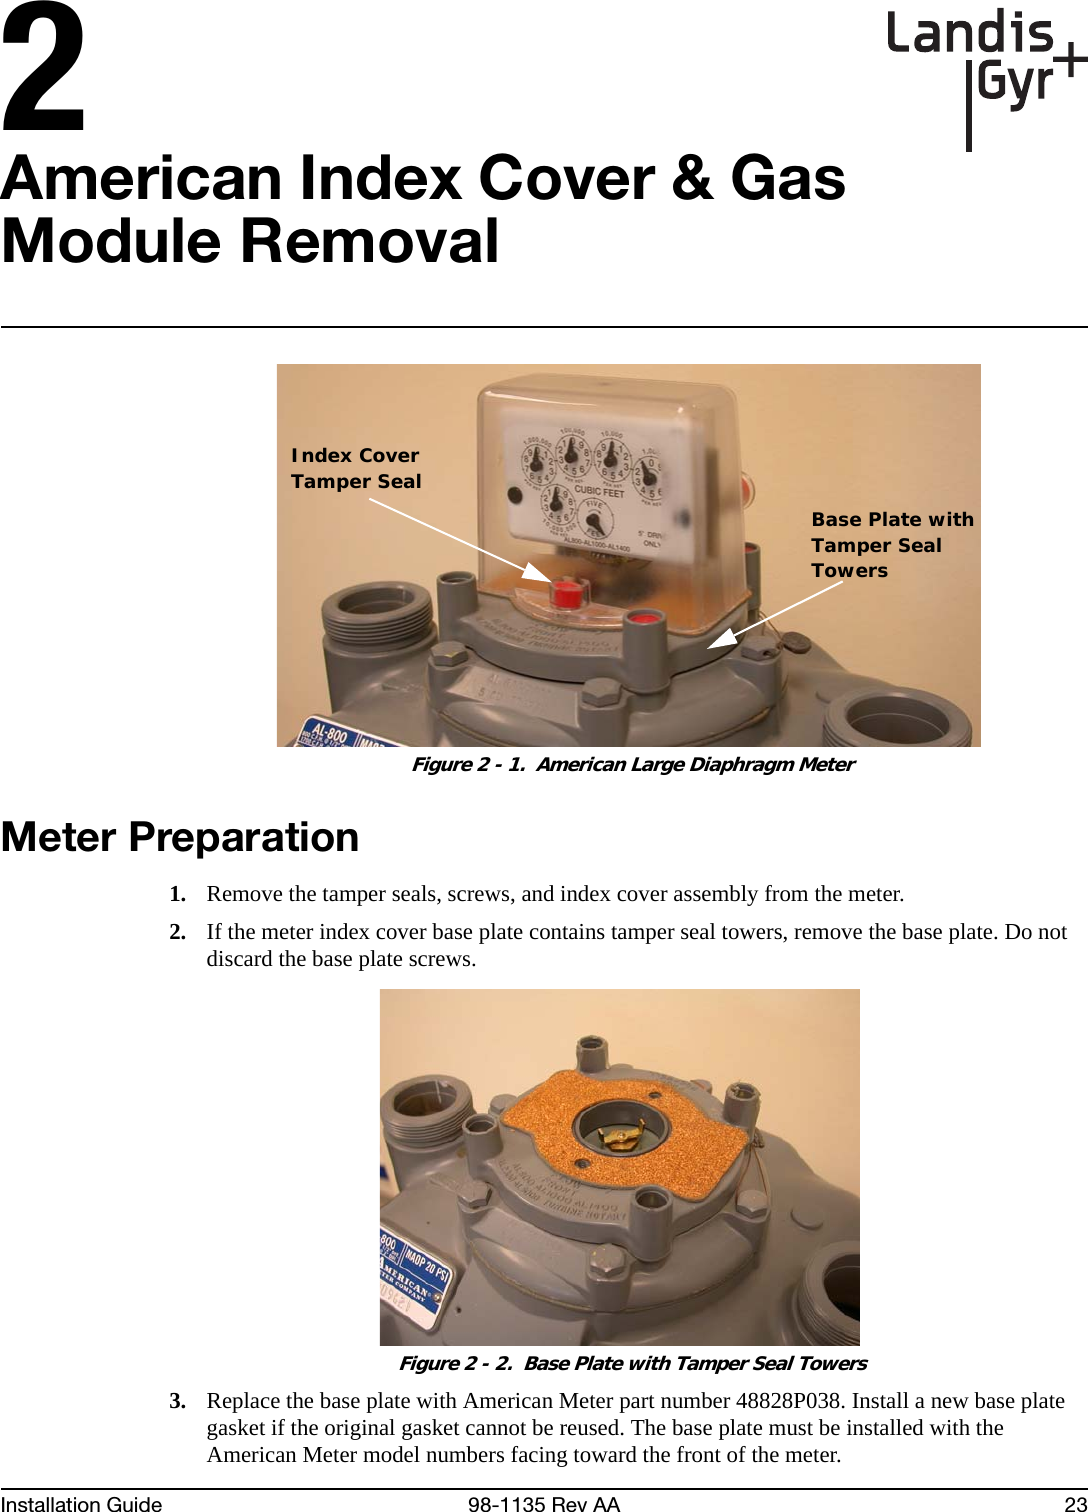 2Installation Guide 98-1135 Rev AA 23American Index Cover &amp; Gas Module Removal Figure 2 - 1.  American Large Diaphragm MeterMeter Preparation1. Remove the tamper seals, screws, and index cover assembly from the meter.2. If the meter index cover base plate contains tamper seal towers, remove the base plate. Do not discard the base plate screws. Figure 2 - 2.  Base Plate with Tamper Seal Towers3. Replace the base plate with American Meter part number 48828P038. Install a new base plate gasket if the original gasket cannot be reused. The base plate must be installed with the American Meter model numbers facing toward the front of the meter.Index CoverTamper SealBase Plate withTamper SealTowers